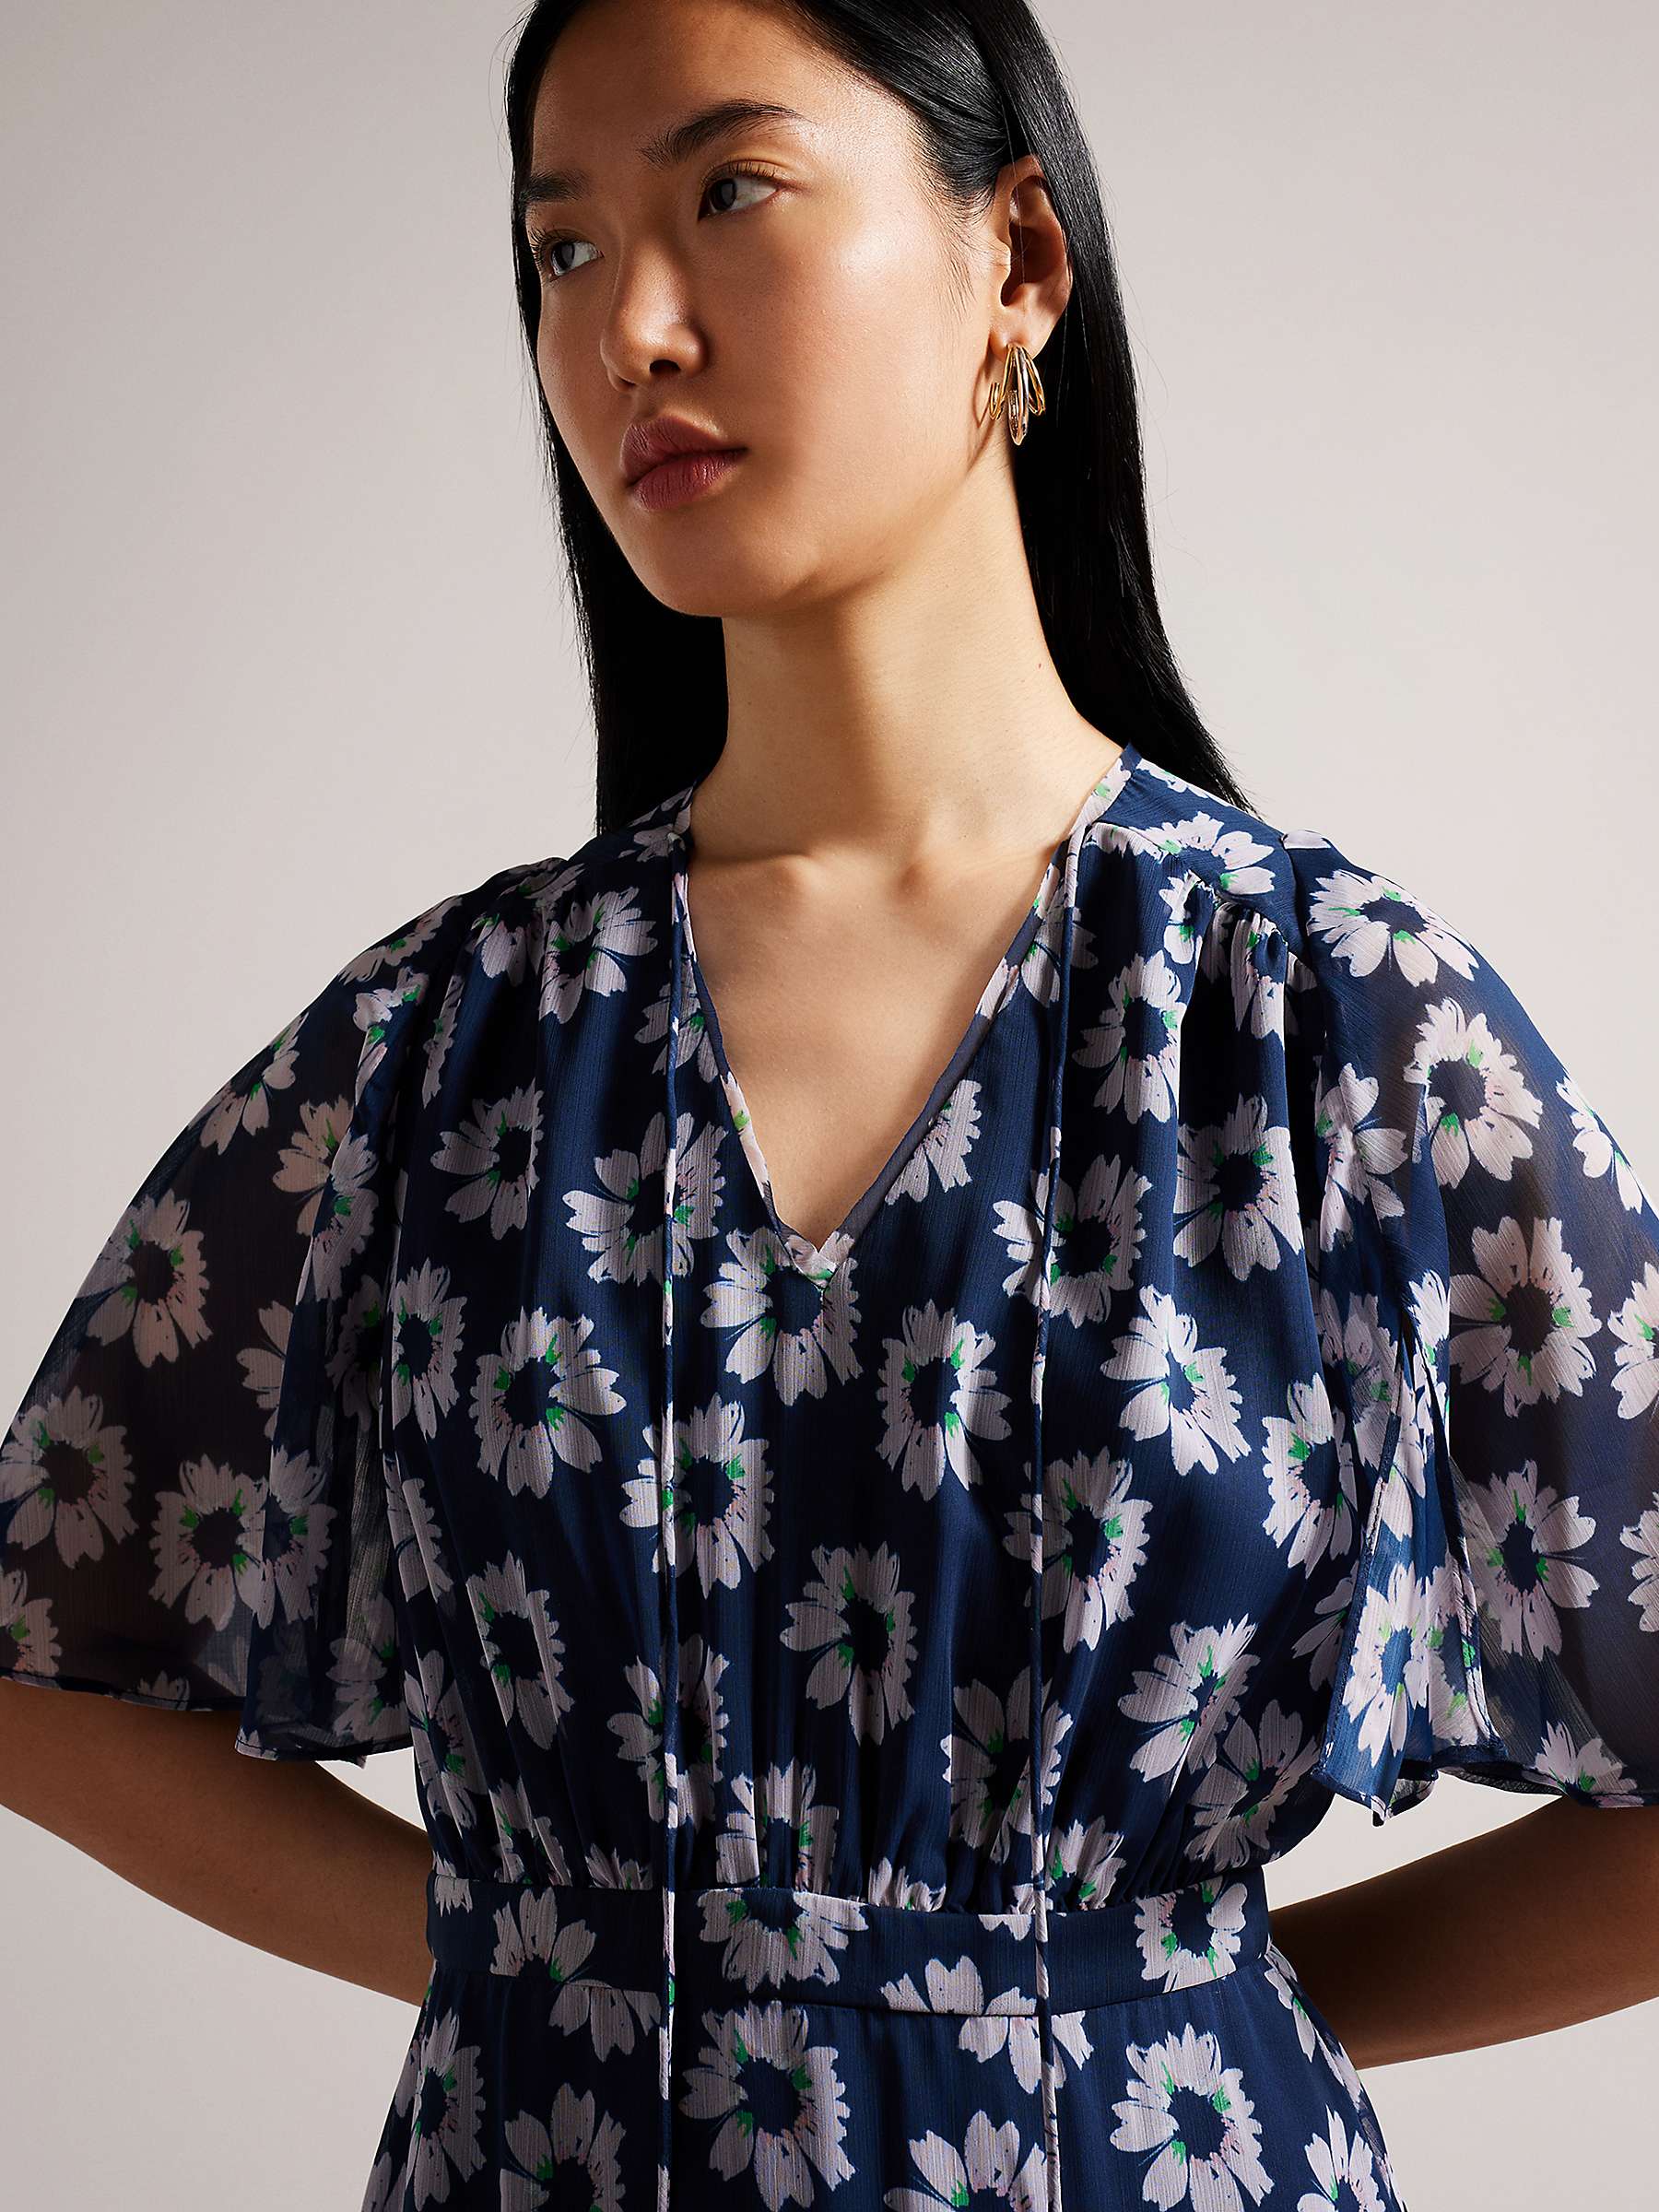 Buy Ted Baker Marllee Fit and Flare Floral Tiered Midi Dress, Dark Navy/White Online at johnlewis.com